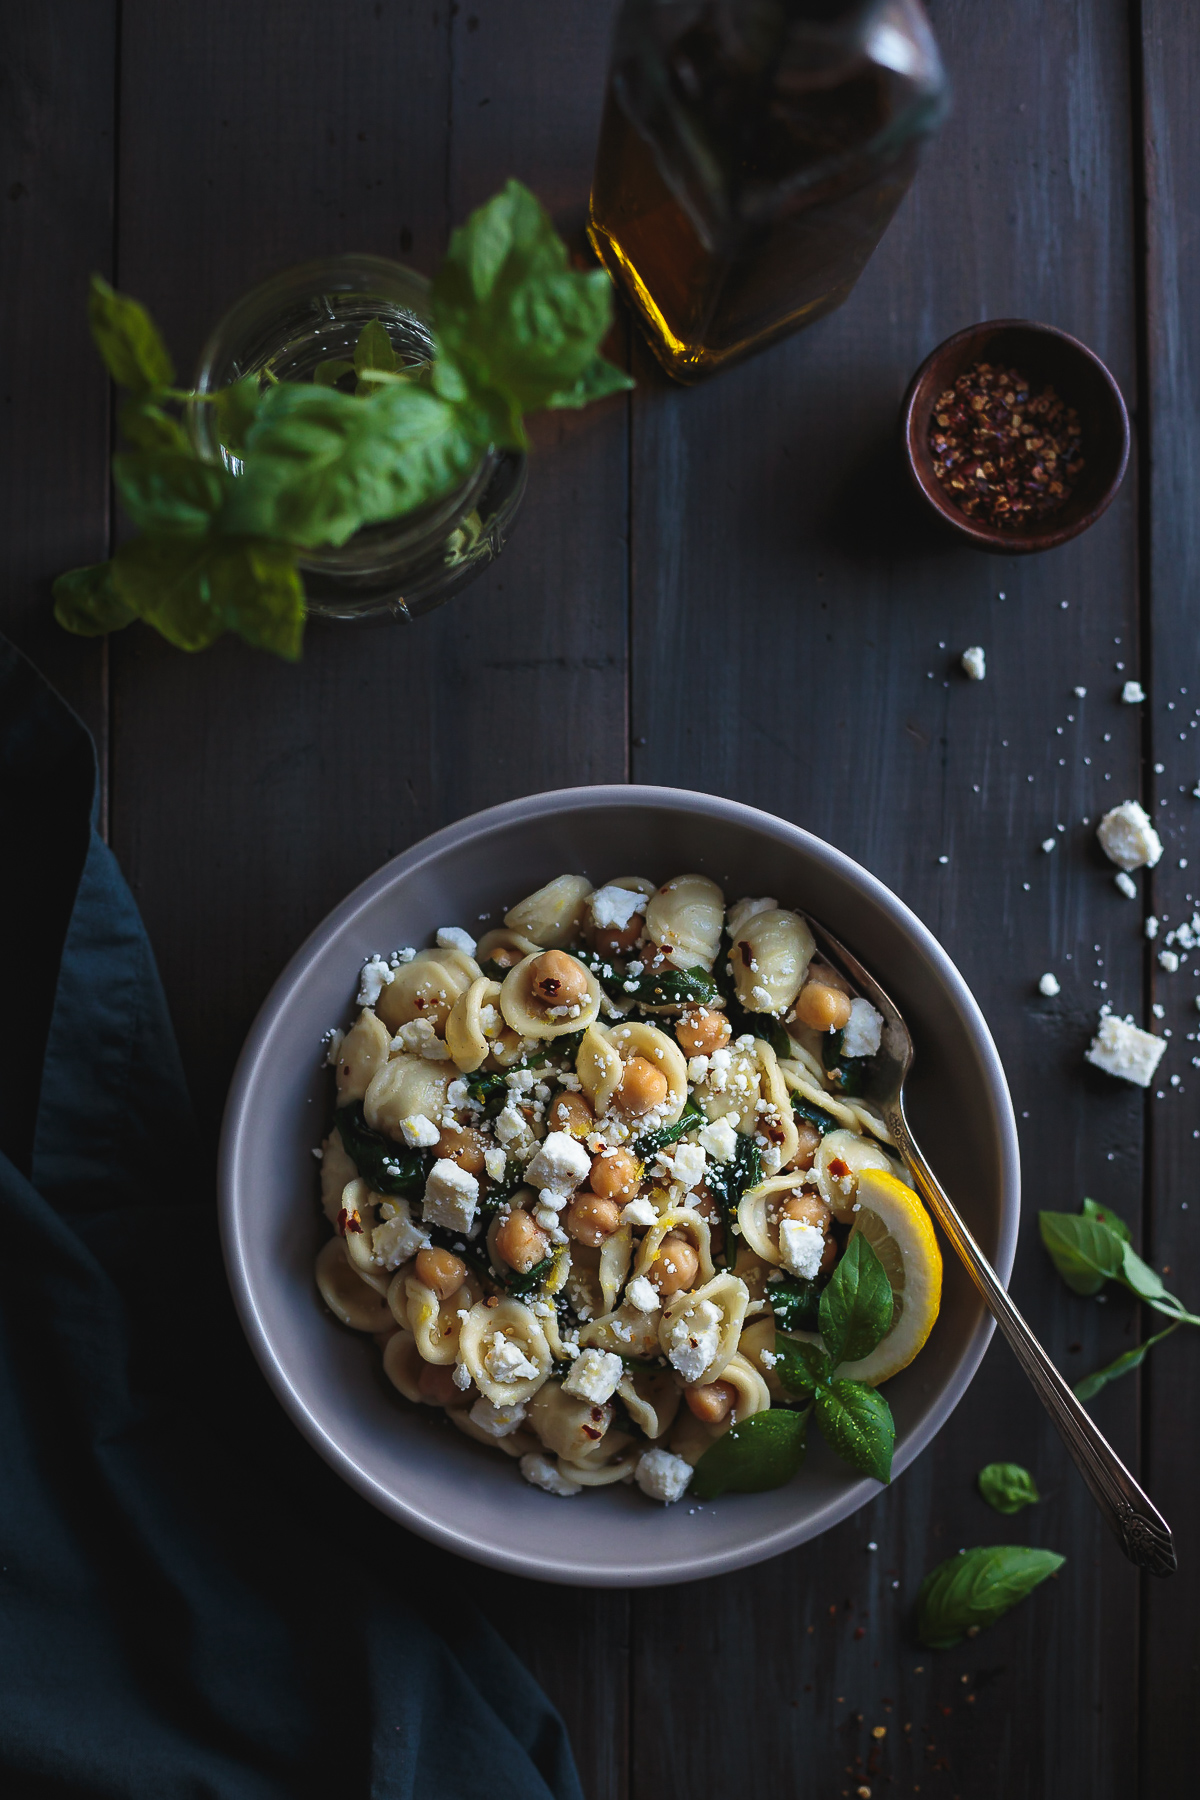 Orecchiette with Chickpeas Spinach and Feta is a simple and quick dinner that tastes incredible! In the time it takes to boil the pasta, you can prepare the rest of the ingredients and have dinner on the table in a flash. From @tasteLUVnourish #orecchiette #chickpeas #spinach #feta #easydinnerrecipes #pastarecipes